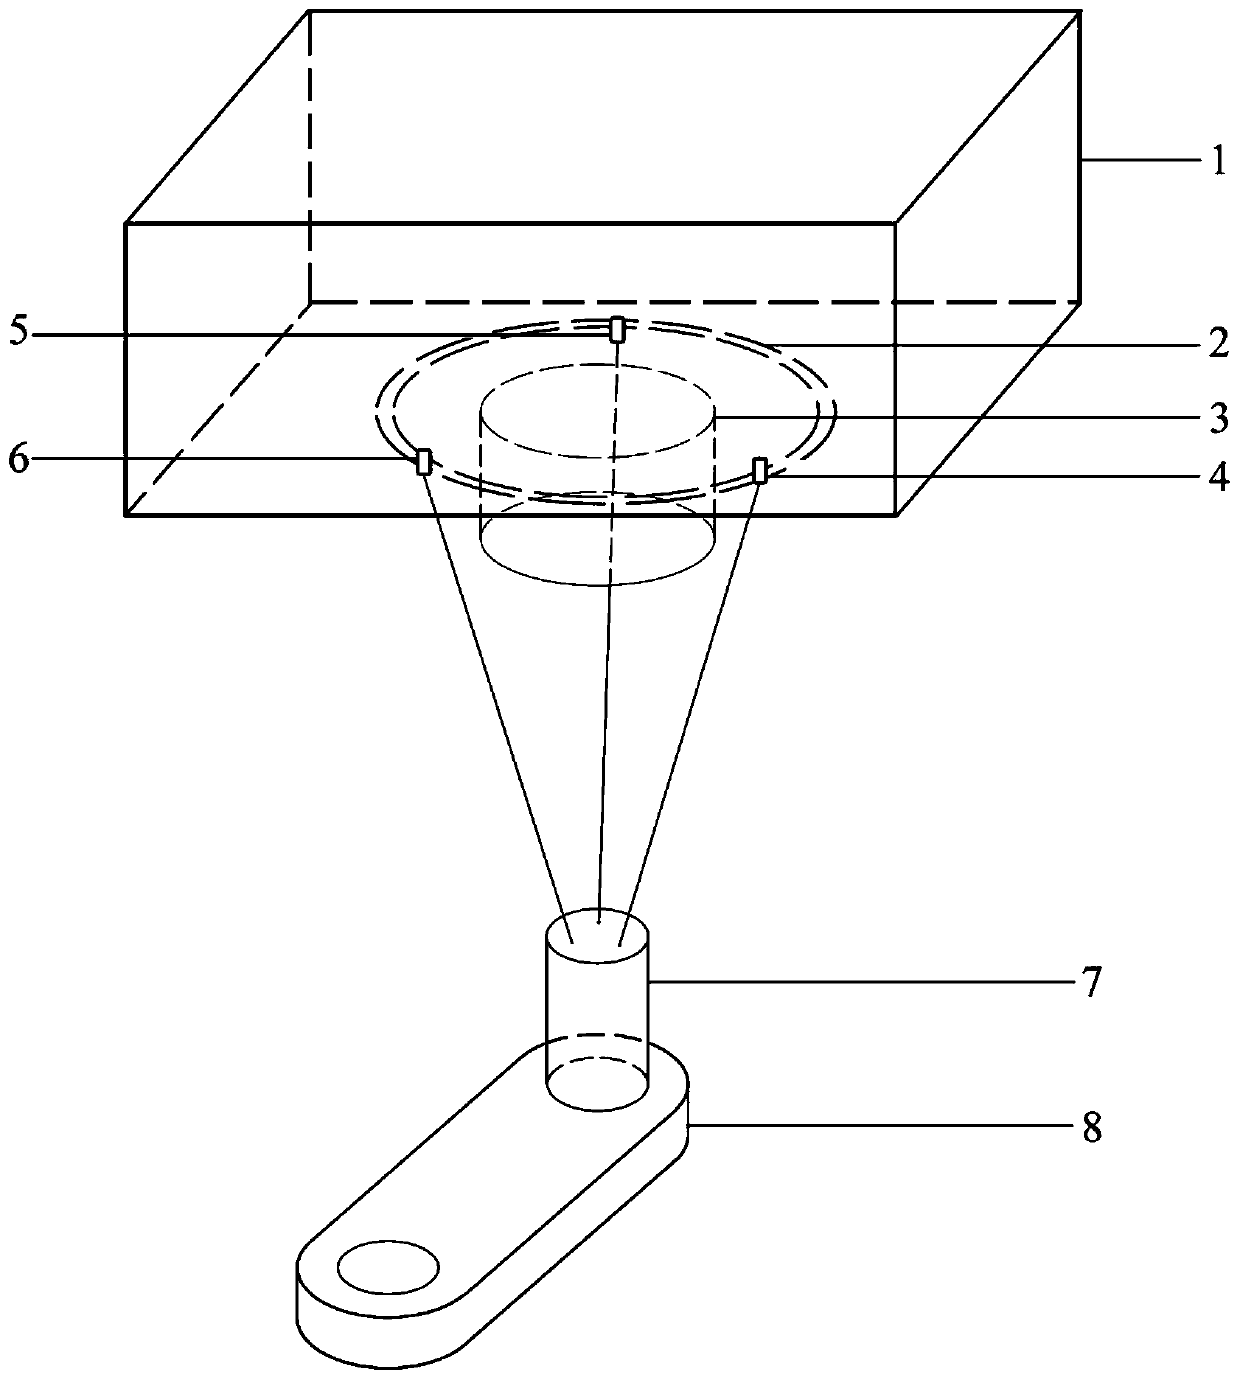 A Method and Device for Calibrating the Perpendicularity of Hole Extrusion Mandrel Based on Laser Measurement